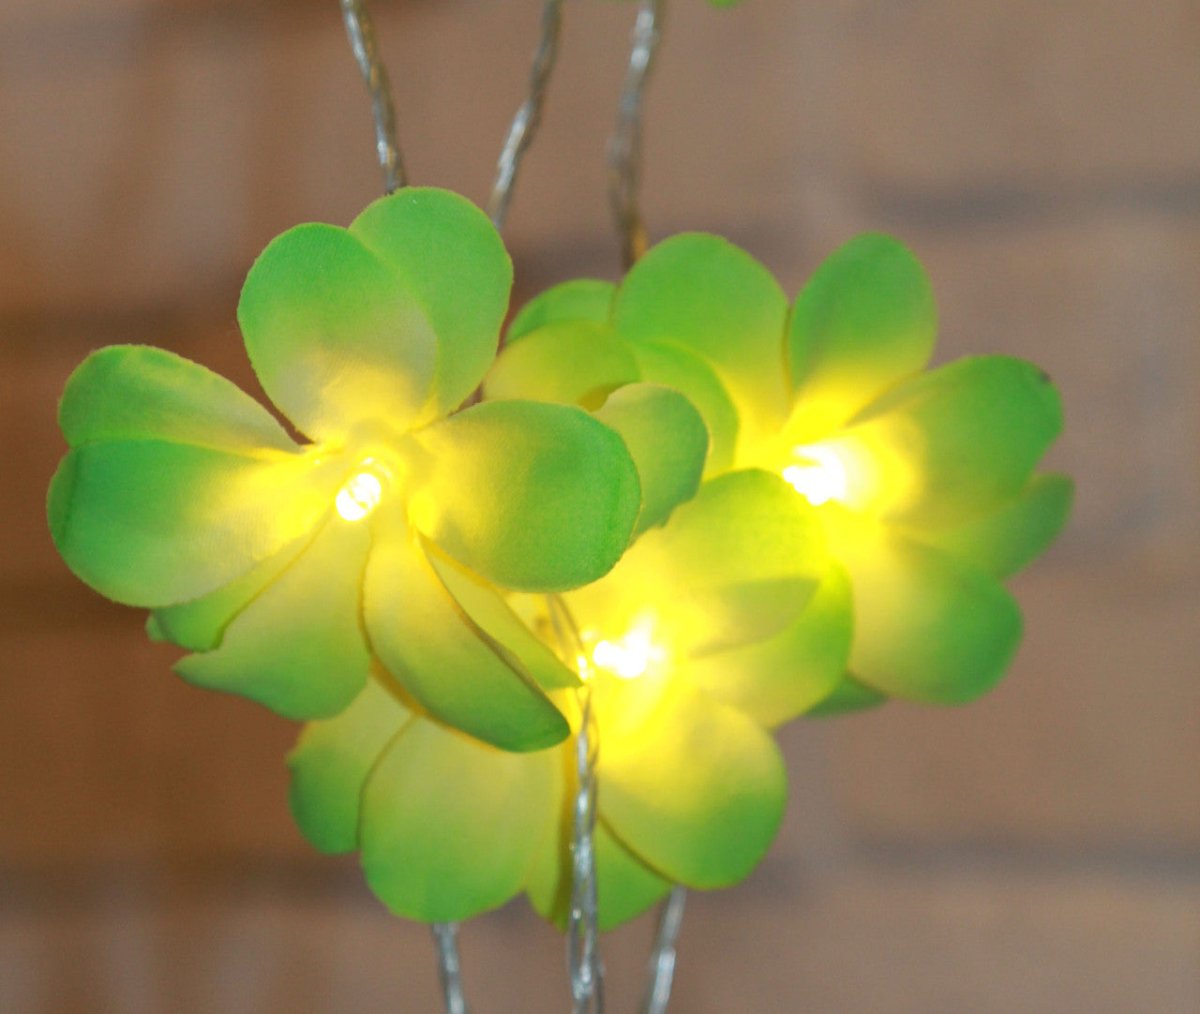 Set of 20 LED Green Frangipani Flower String Lights - Perfect for Christmas, Wedding &amp; Outdoor Decorations - Outdoorium